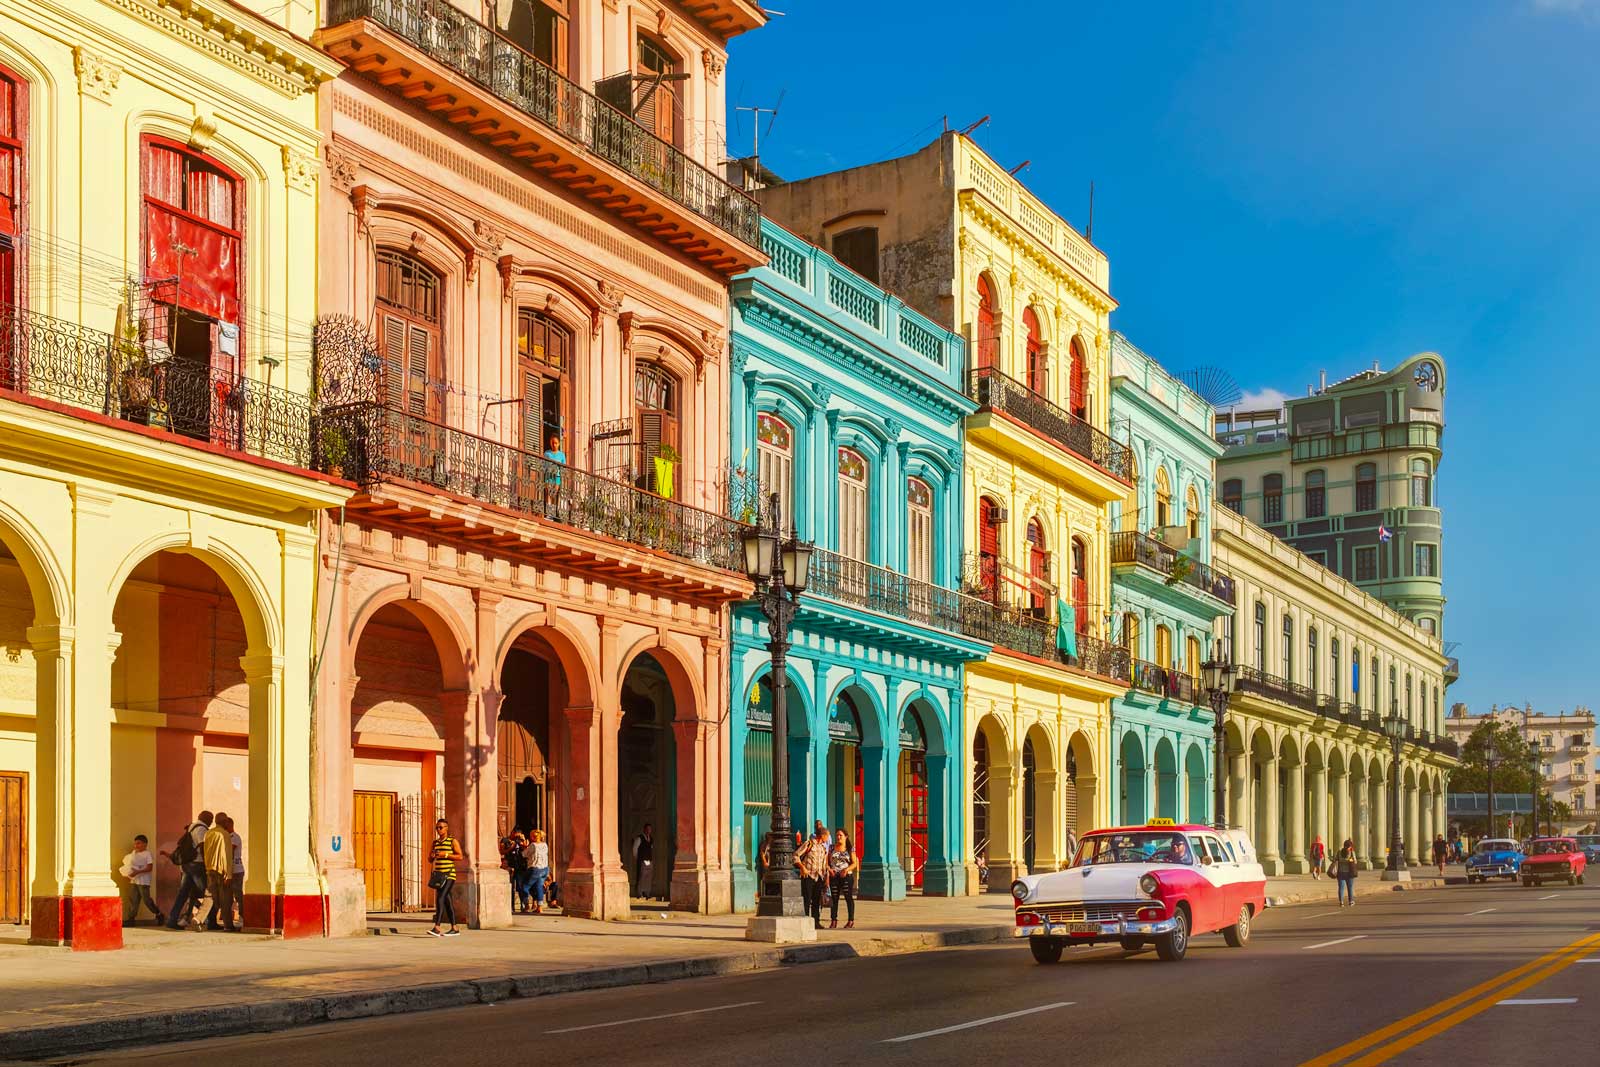 travel to us if been to cuba